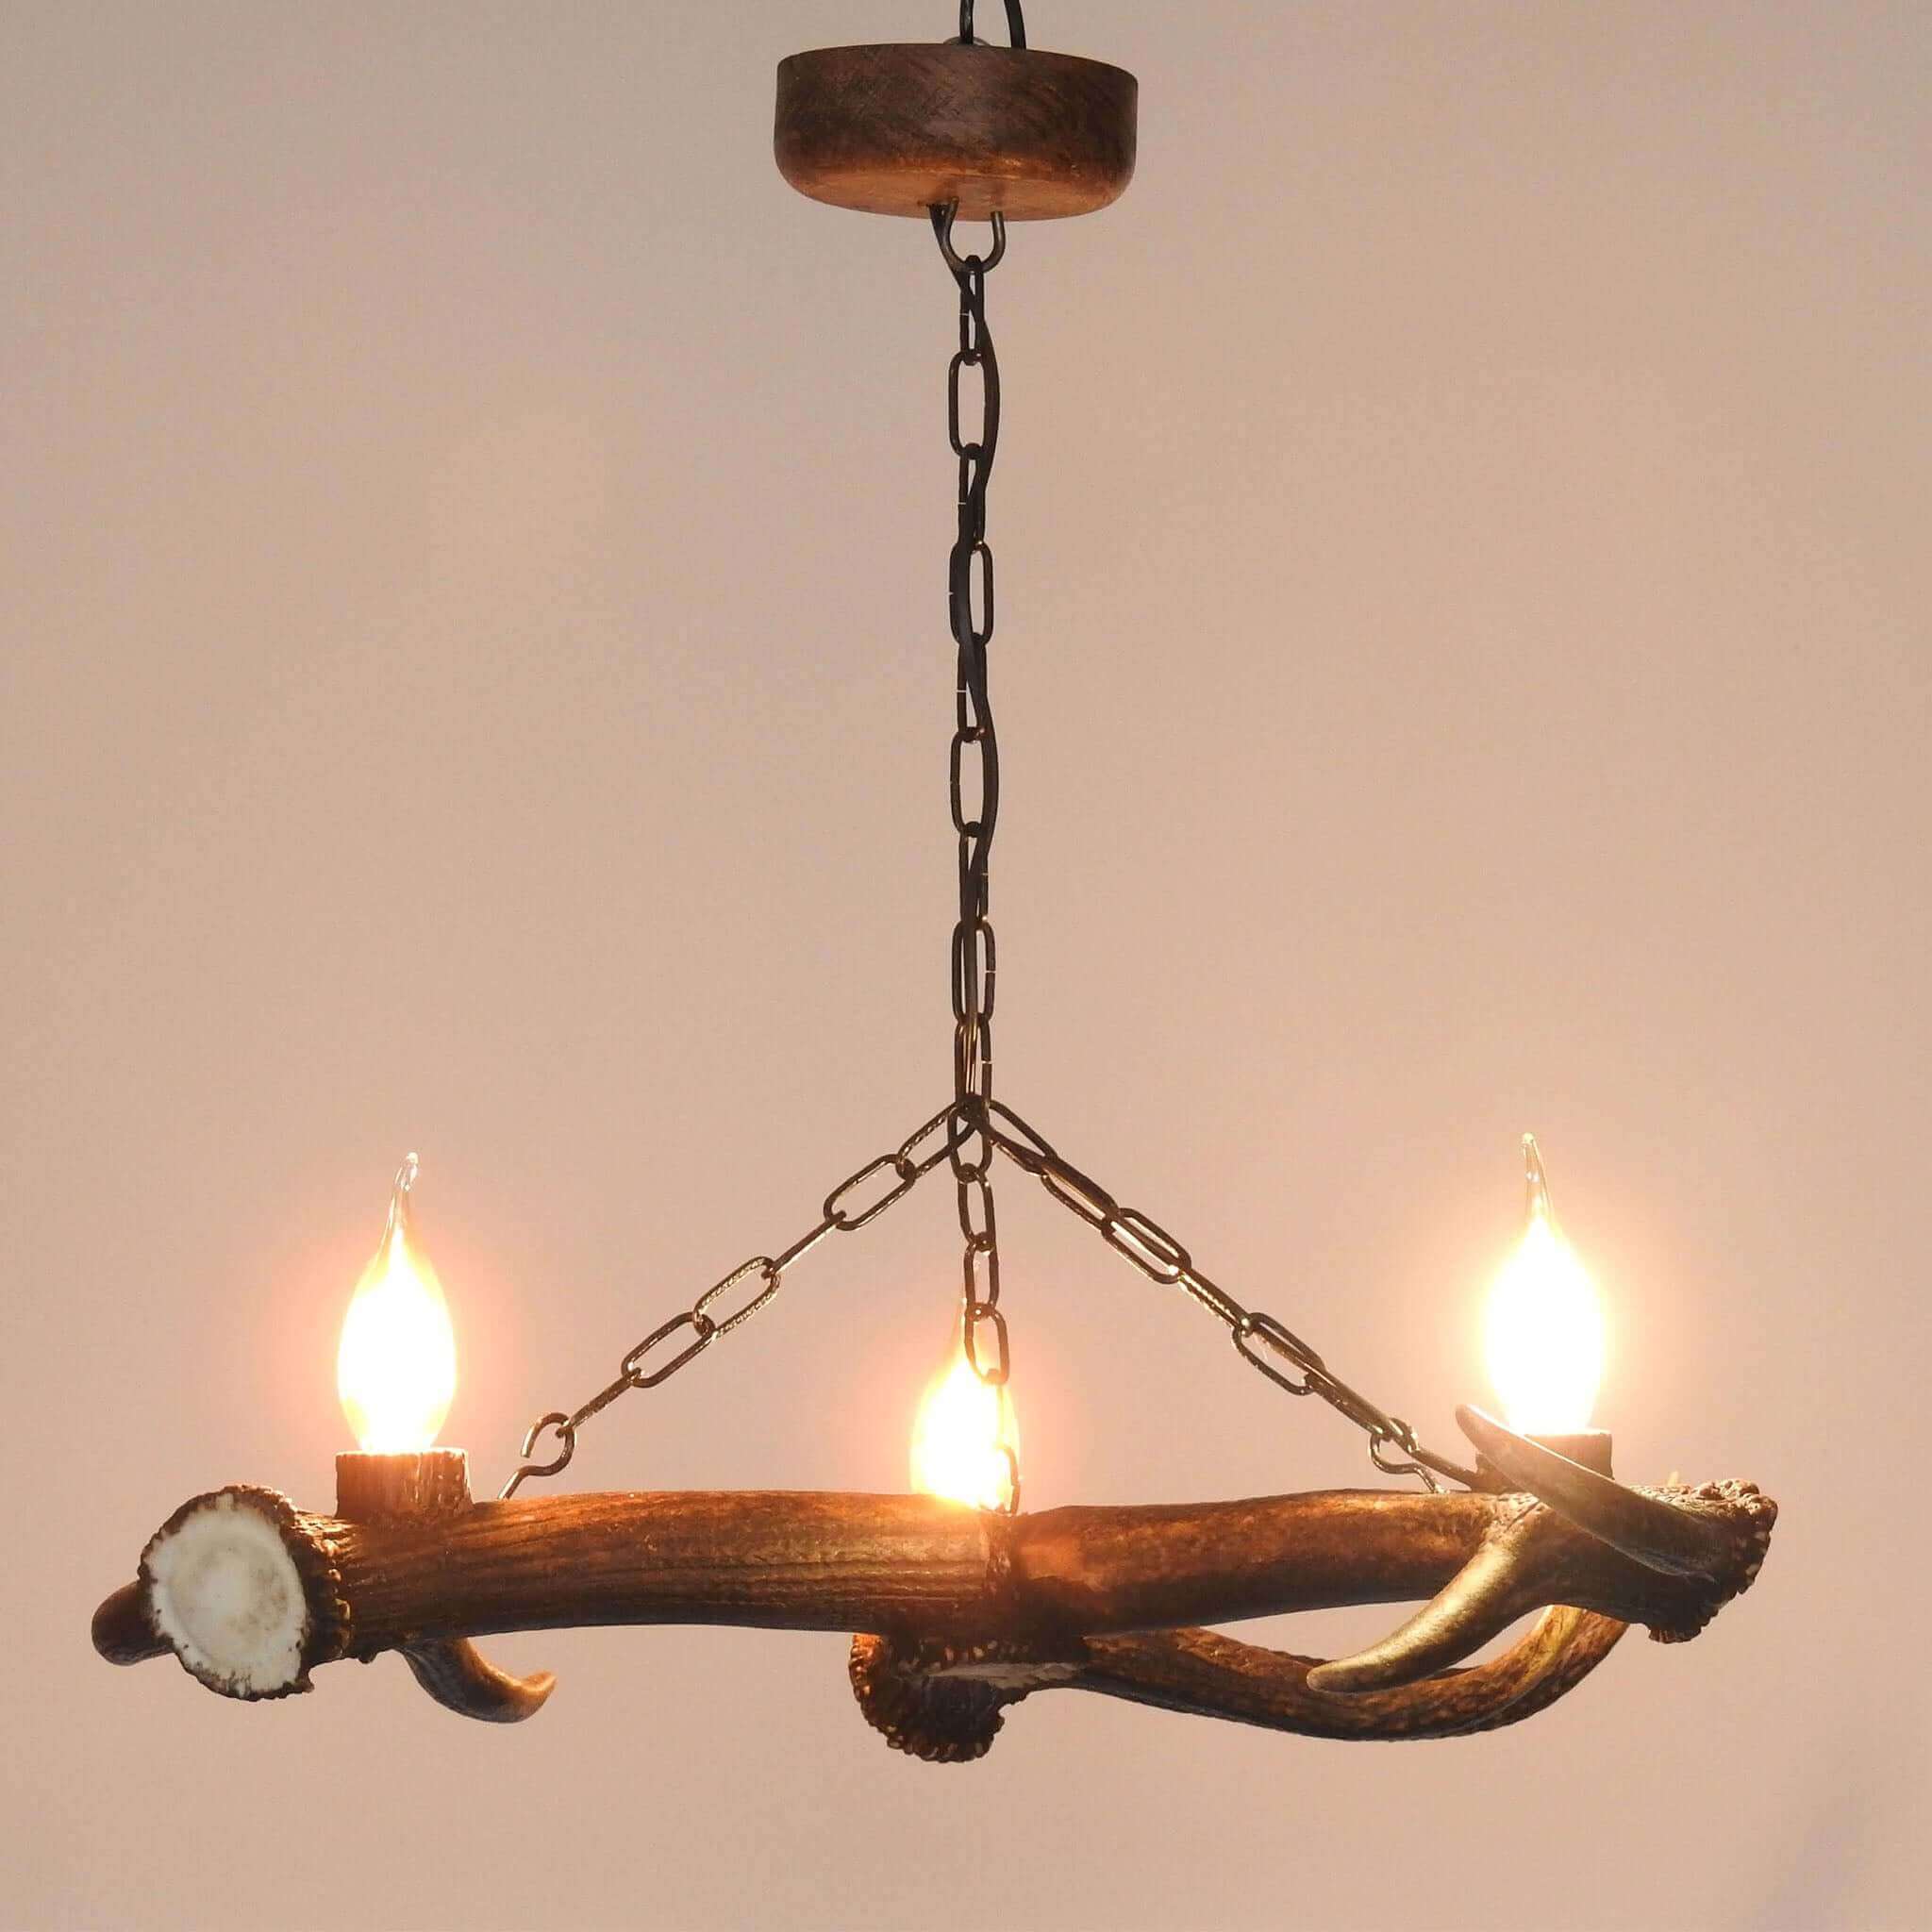 Real Small Antler Chandelier for 3 Lights on Chain